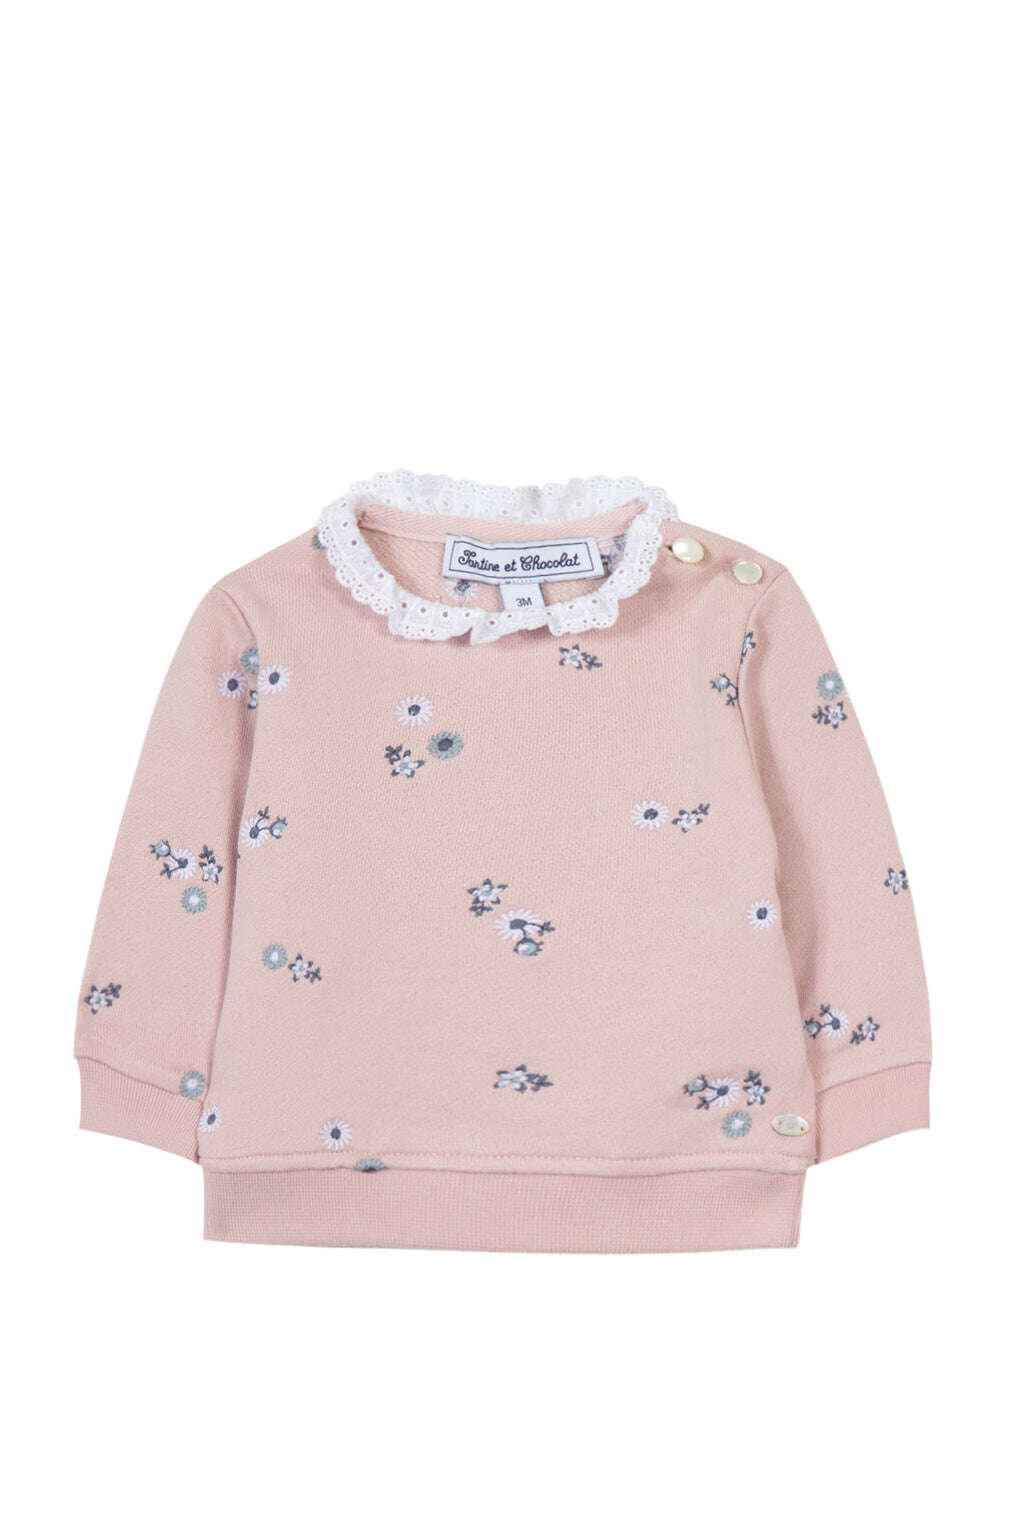 Sweat-shirt - Lilas broderie florale